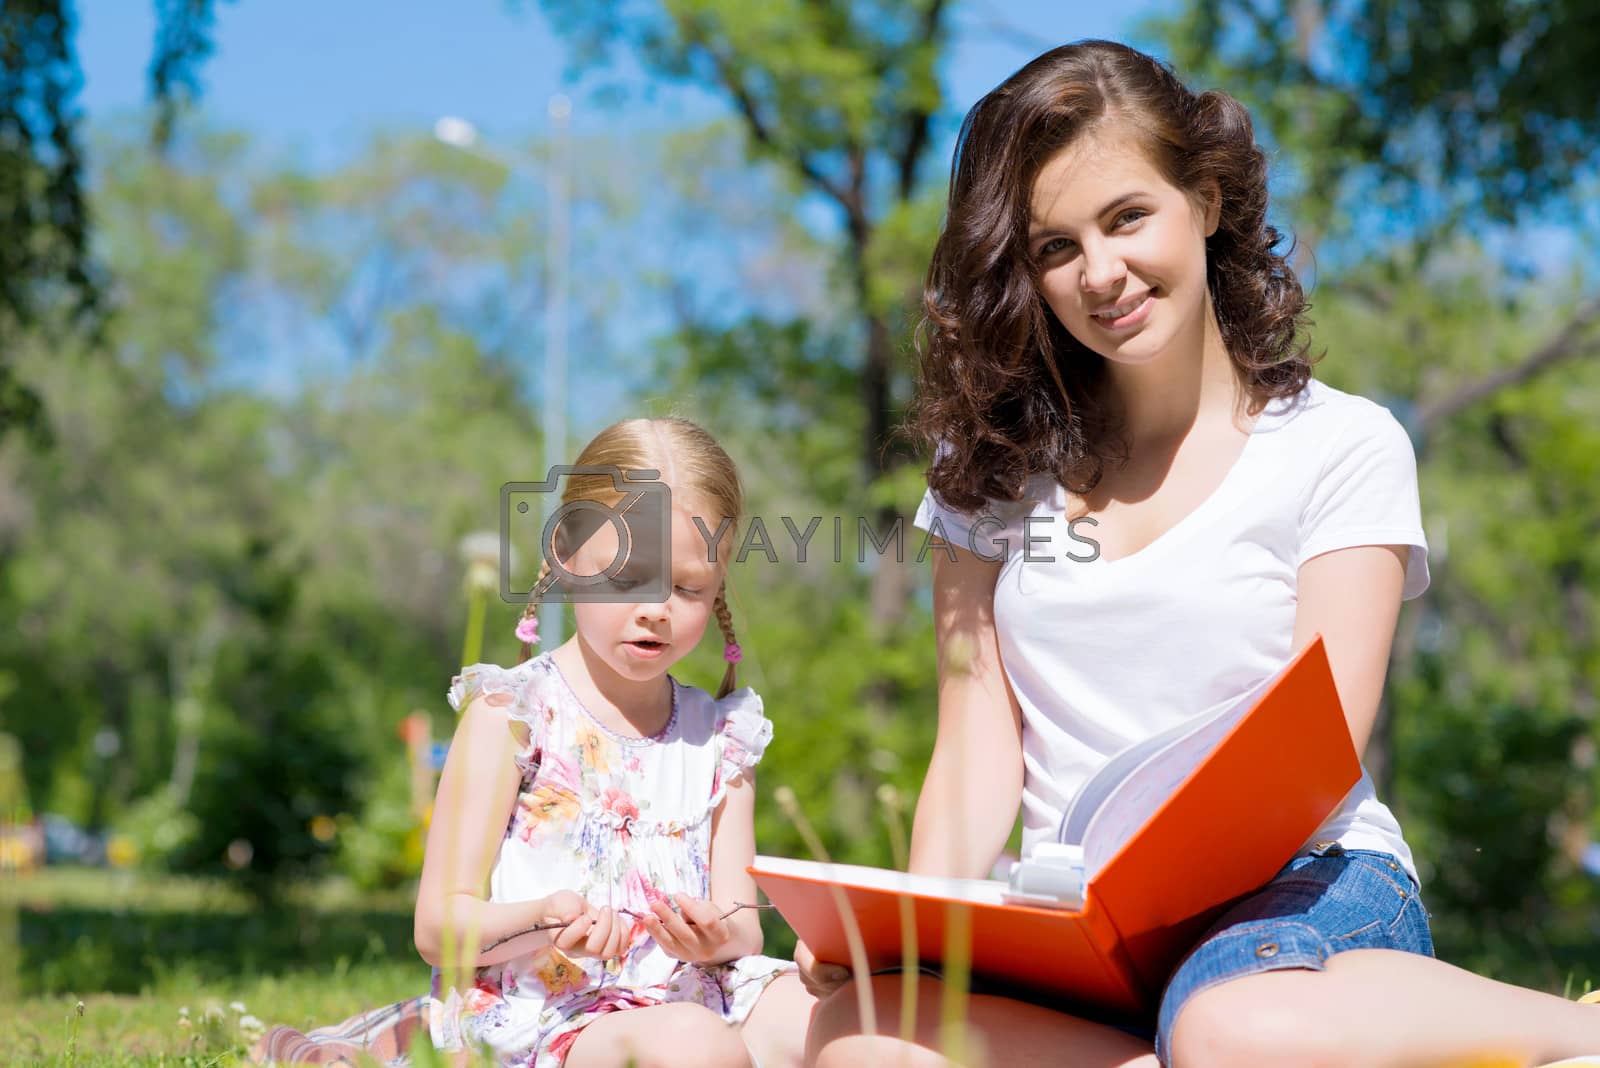 Royalty free image of girl and a young woman reading a book together by adam121